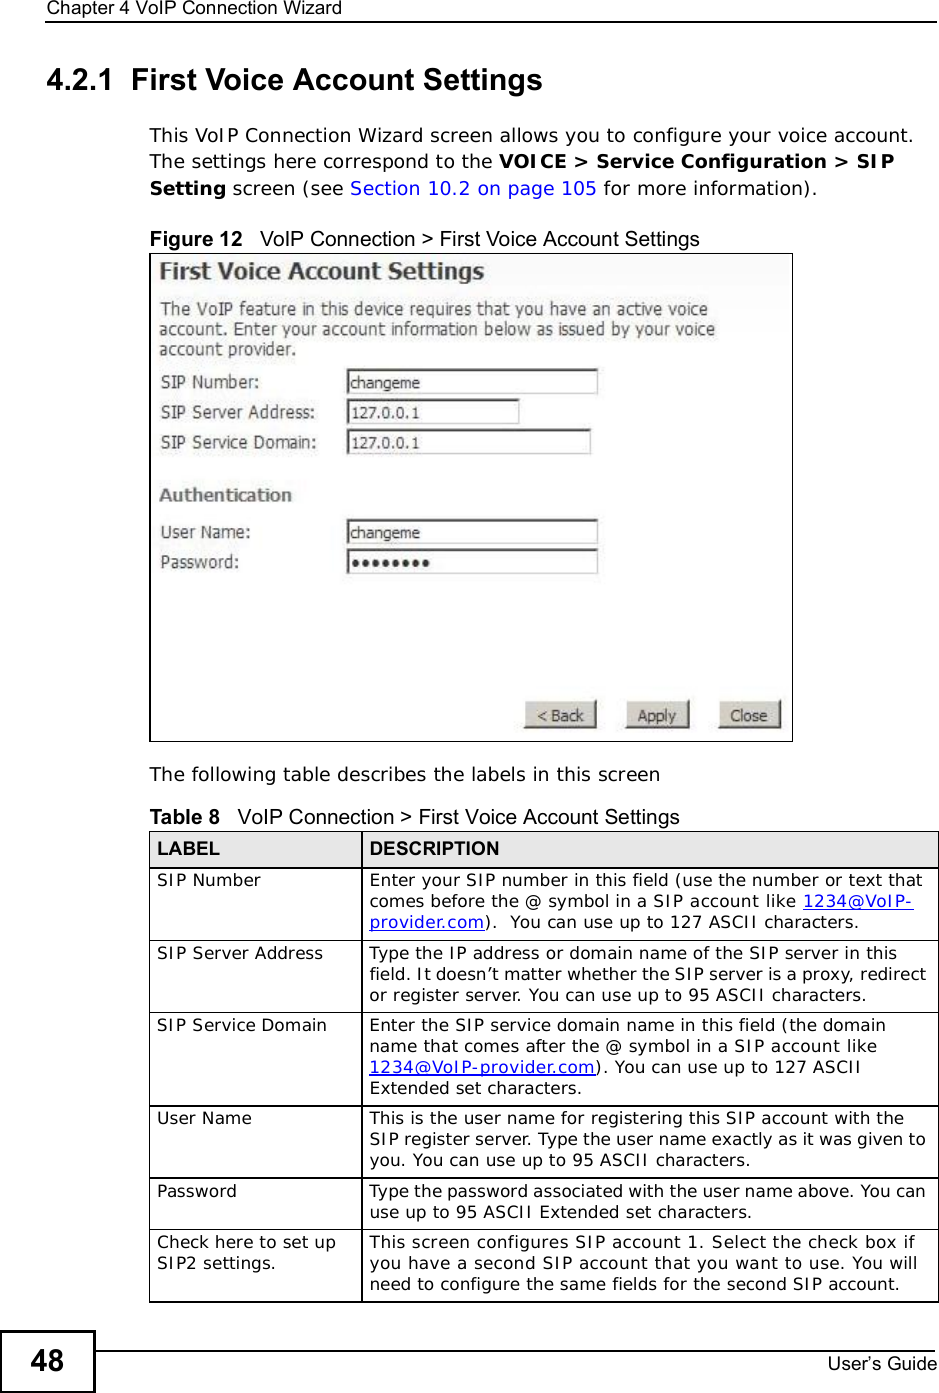 Chapter 4VoIP Connection WizardUser s Guide484.2.1  First Voice Account SettingsThis VoIP Connection Wizard screen allows you to configure your voice account. The settings here correspond to the VOICE &gt; Service Configuration &gt; SIP Setting screen (see Section 10.2 on page 105 for more information).Figure 12   VoIP Connection &gt; First Voice Account SettingsThe following table describes the labels in this screenTable 8   VoIP Connection &gt; First Voice Account SettingsLABEL DESCRIPTIONSIP NumberEnter your SIP number in this field (use the number or text that comes before the @ symbol in a SIP account like 1234@VoIP-provider.com).  You can use up to 127 ASCII characters.SIP Server AddressType the IP address or domain name of the SIP server in this field. It doesn’t matter whether the SIP server is a proxy, redirect or register server. You can use up to 95 ASCII characters.SIP Service DomainEnter the SIP service domain name in this field (the domain name that comes after the @ symbol in a SIP account like 1234@VoIP-provider.com). You can use up to 127 ASCII Extended set characters.User NameThis is the user name for registering this SIP account with the SIP register server. Type the user name exactly as it was given to you. You can use up to 95 ASCII characters.PasswordType the password associated with the user name above. You can use up to 95 ASCII Extended set characters.Check here to set up SIP2 settings. This screen configures SIP account 1. Select the check box if you have a second SIP account that you want to use. You will need to configure the same fields for the second SIP account.